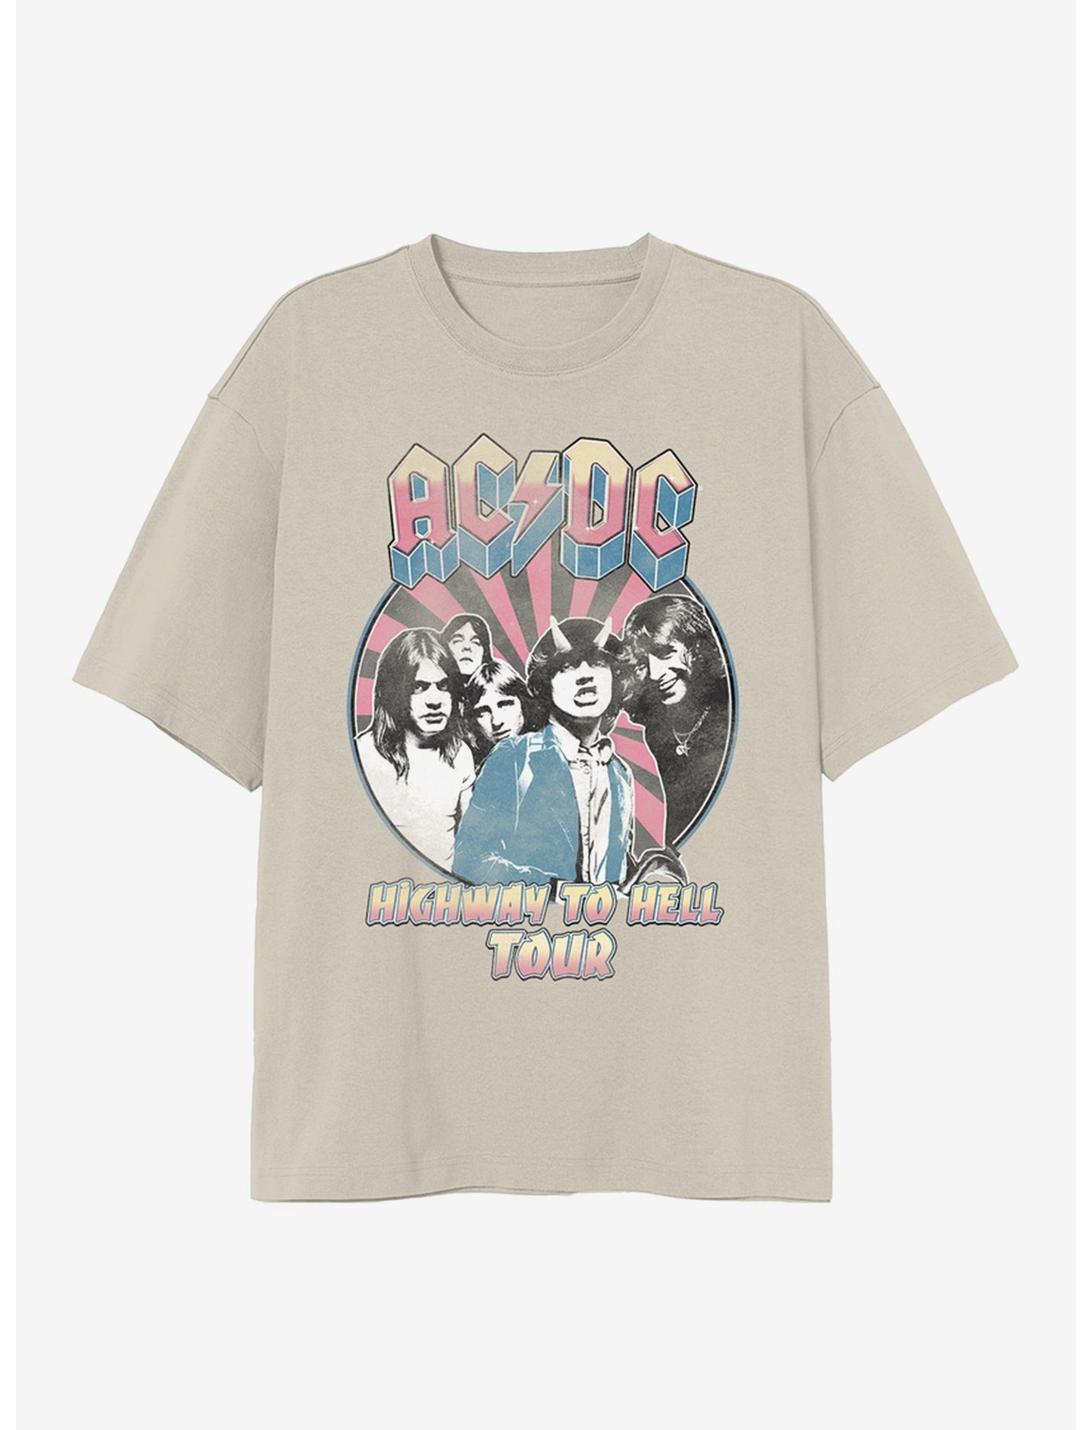 AC/DC Highway To Hell Tour Boyfriend Fit Girls T-Shirt, SAND, hi-res